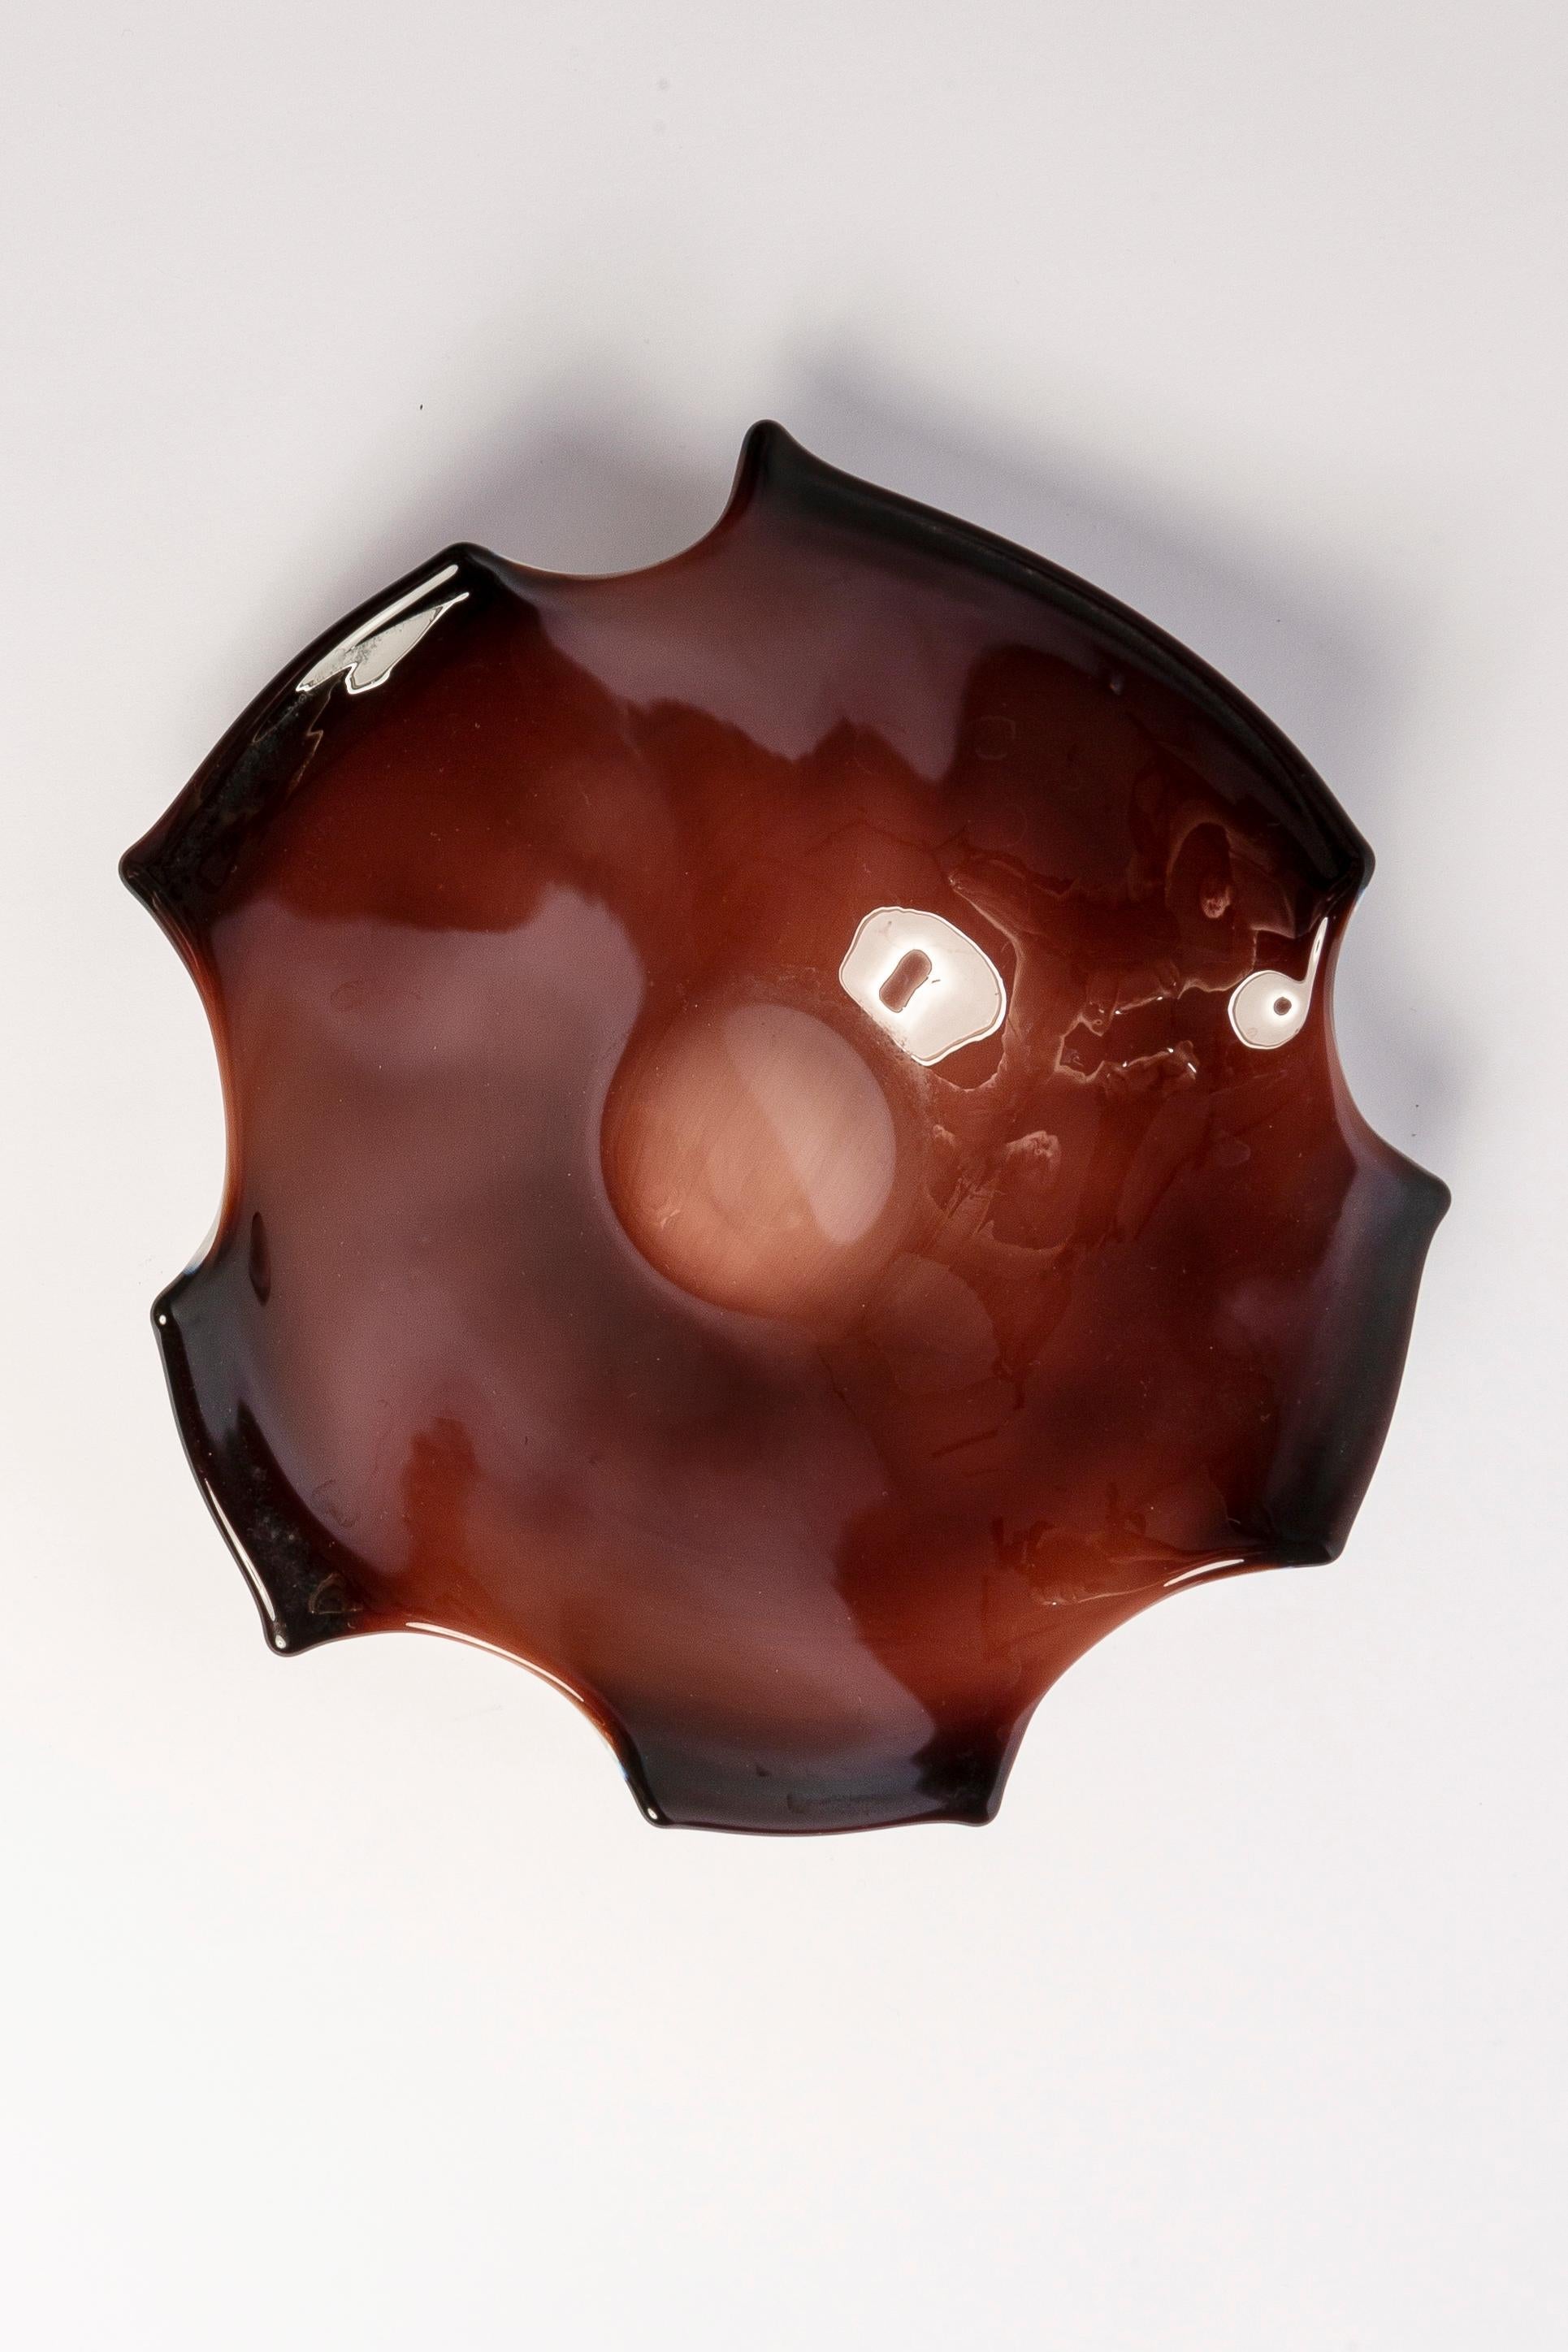 This original vintage glass ash tray bowl element was designed and produced in the 1970s in Poland. It is made in Sommerso Technique and has a fantastic faceted form. The vibrant color makes this items highly decorative. This item is a high quality